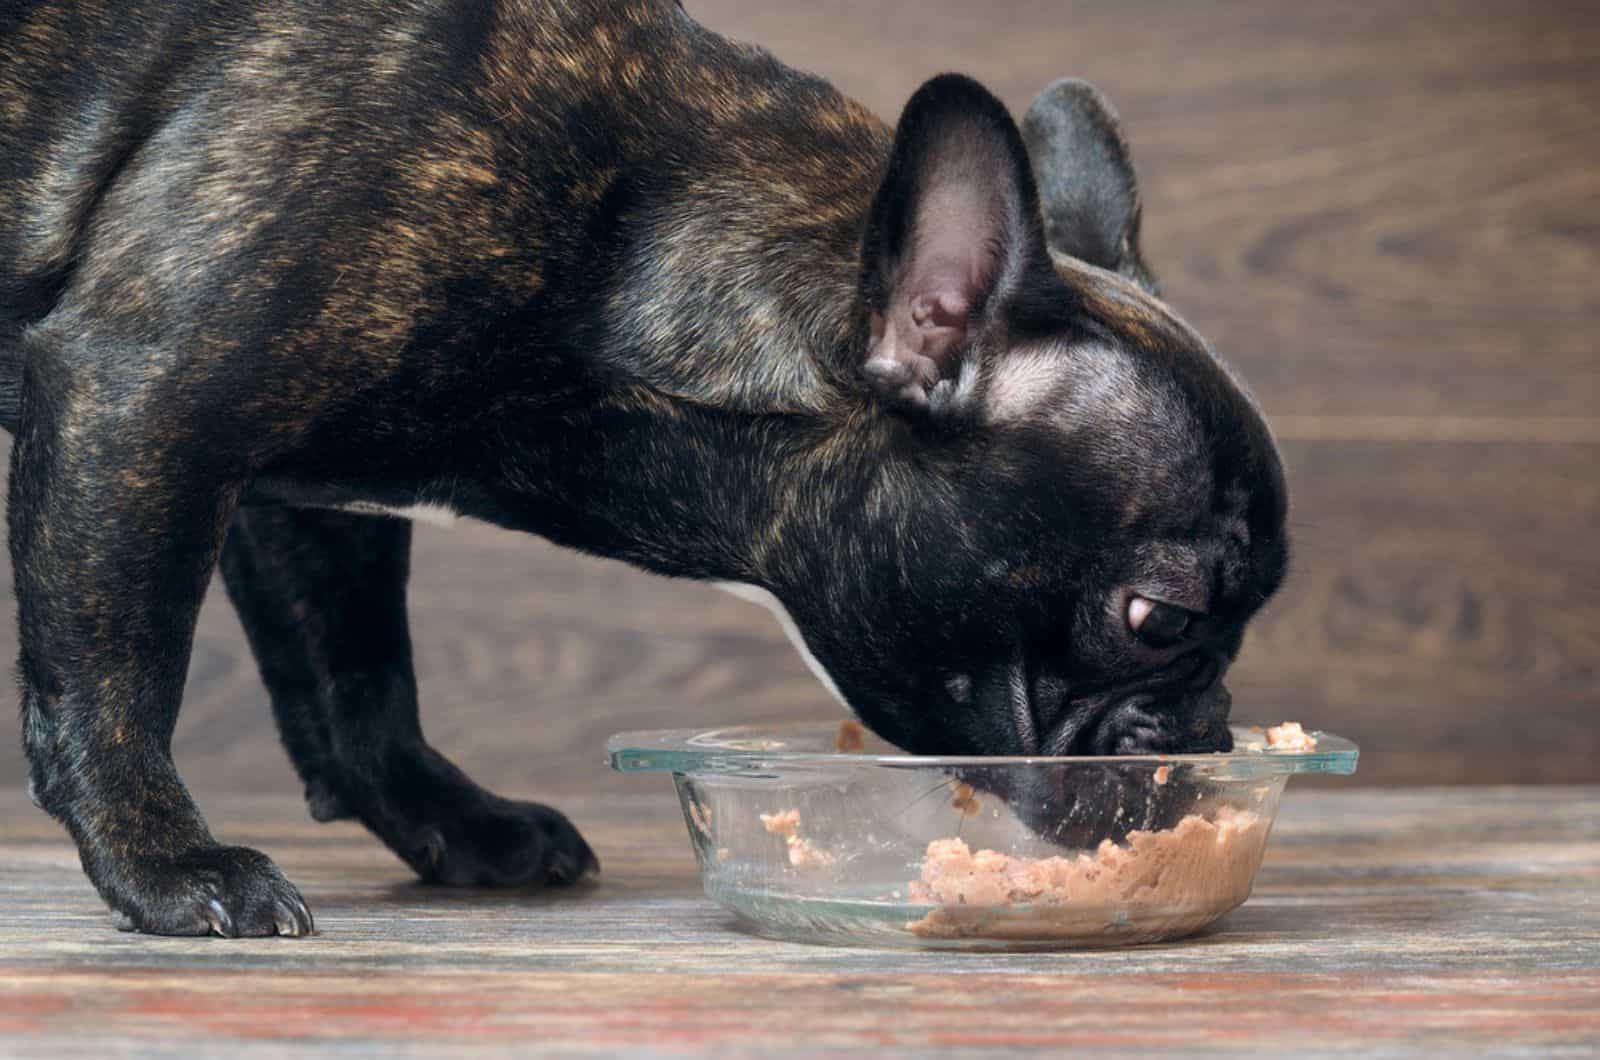 french bulldog eating from a bowl indoors